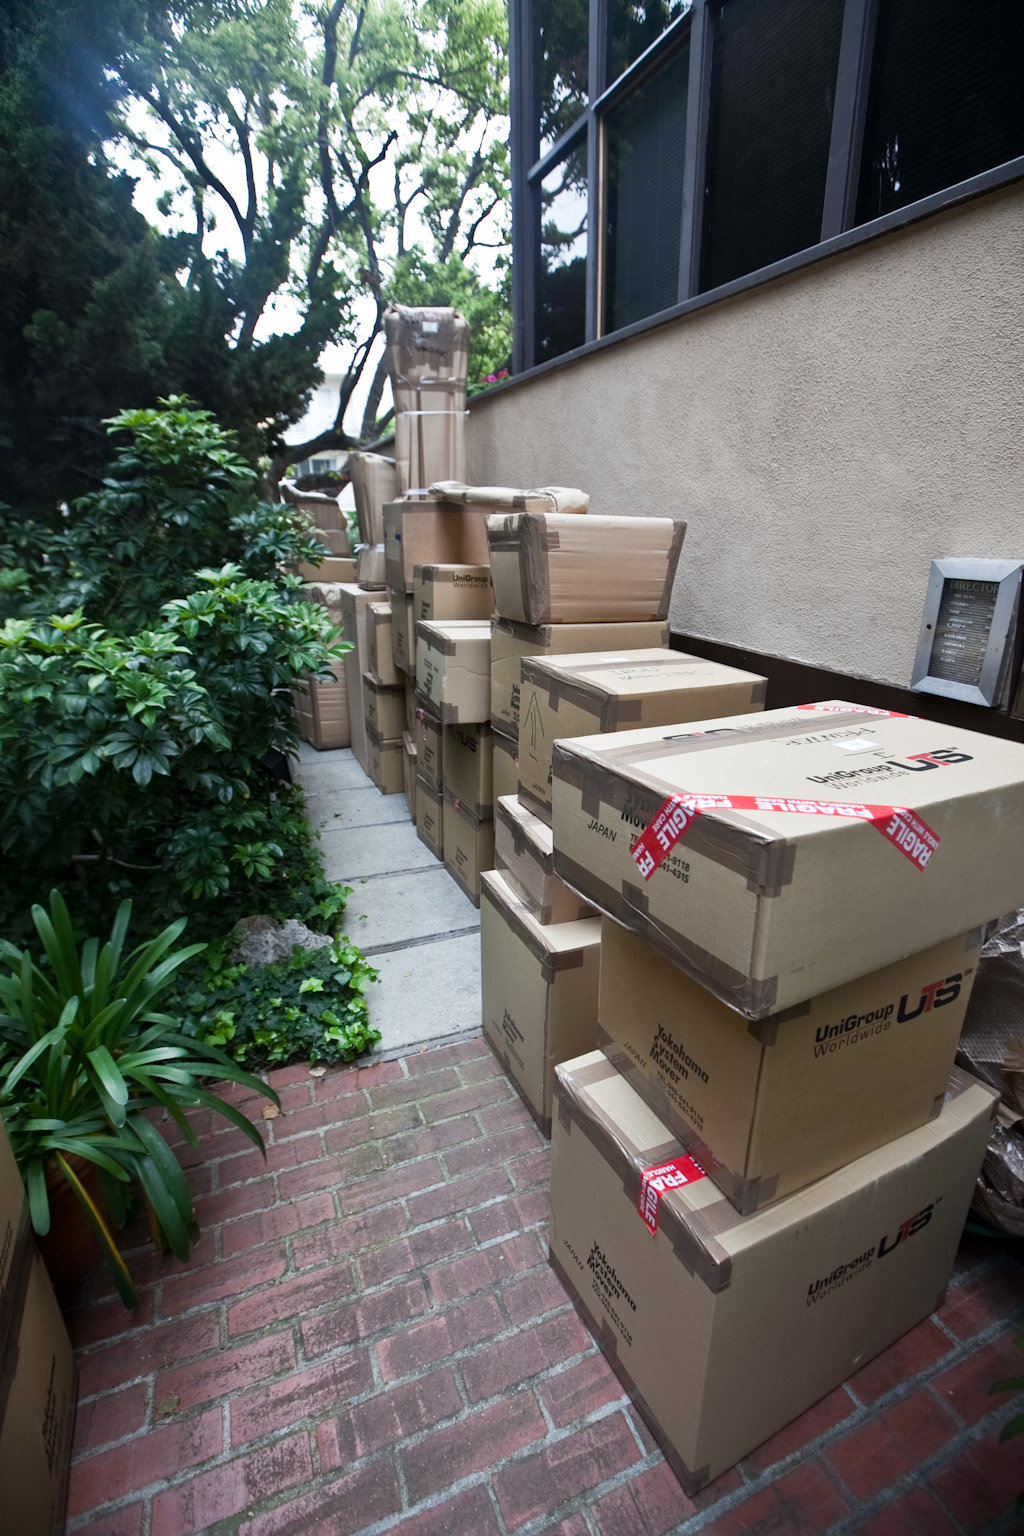 Los Angeles: moving day